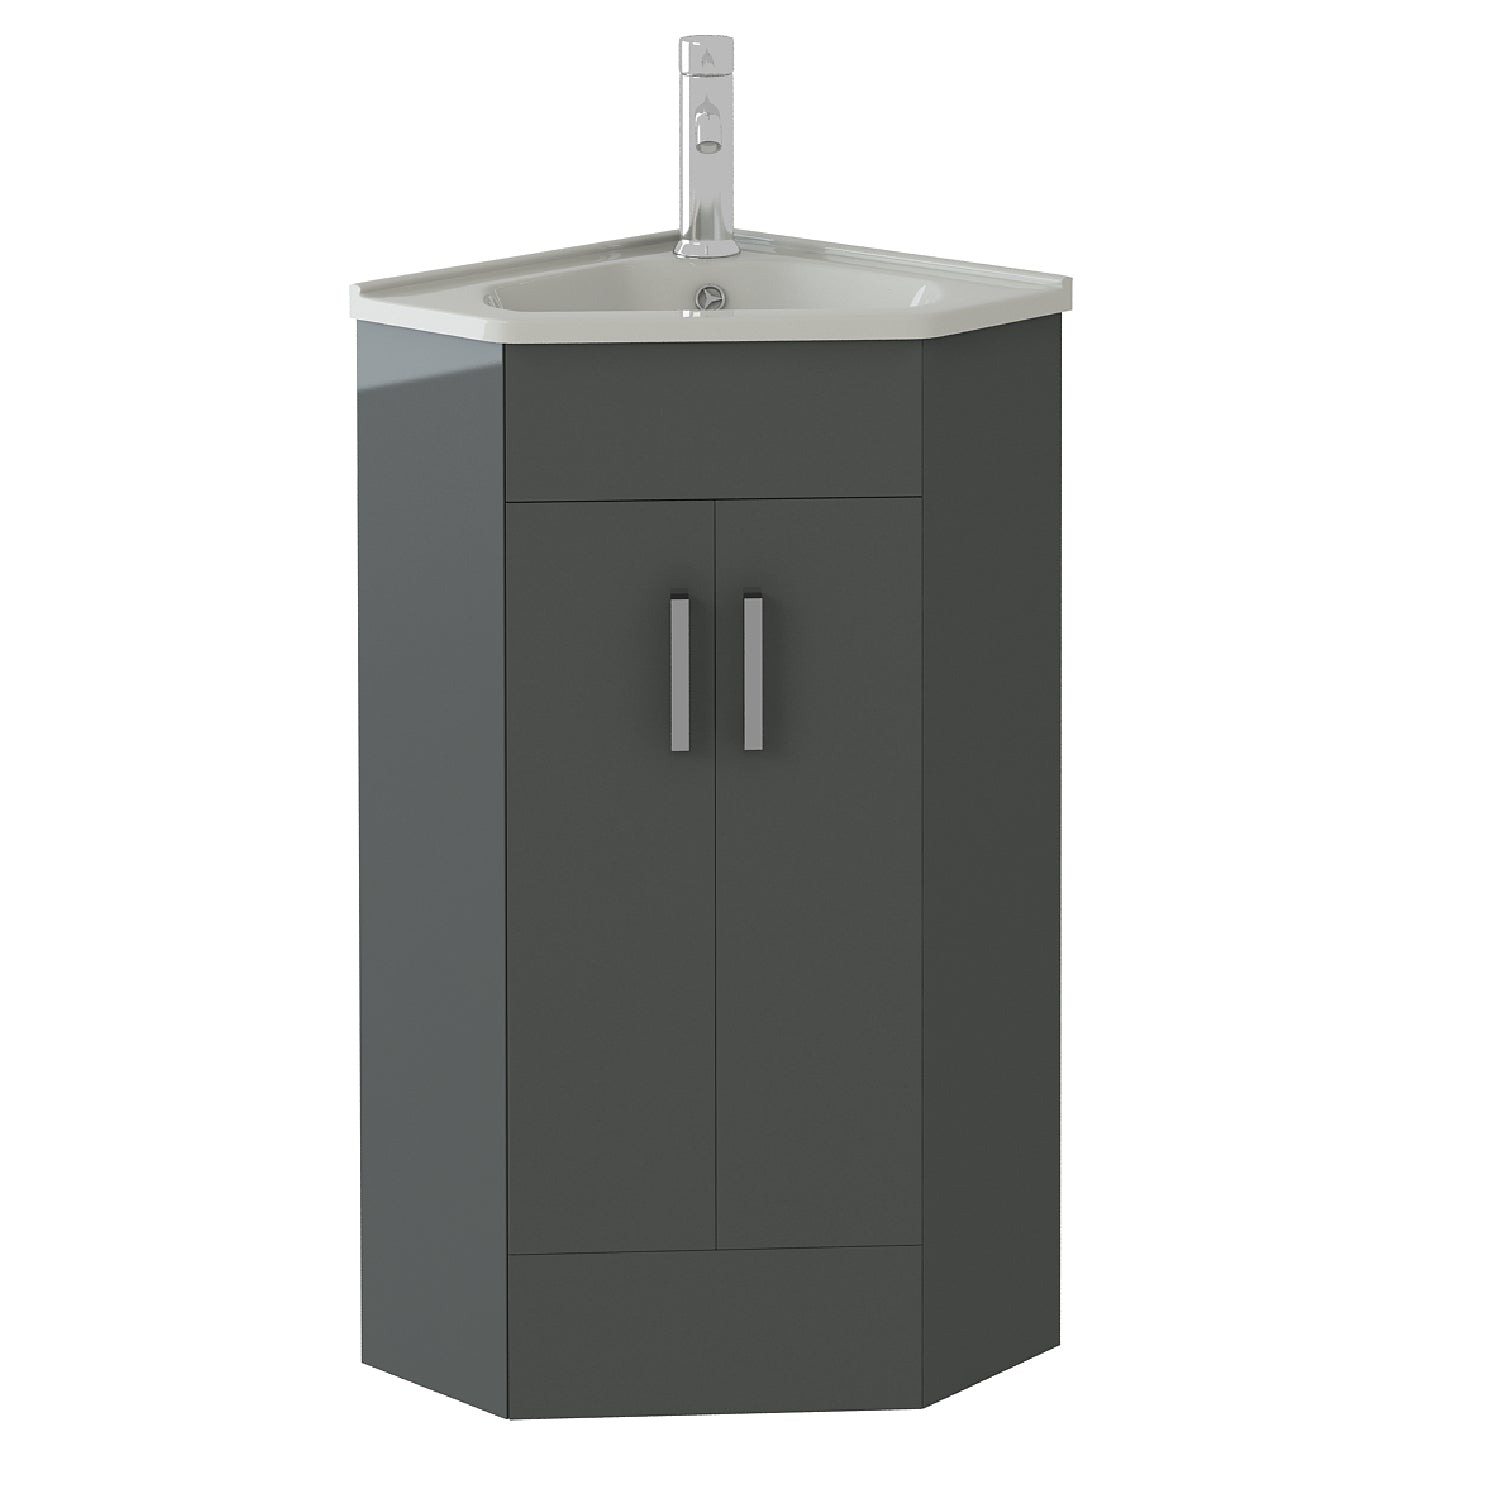 Krona Corner Cloakroom Vanity Unit and Basin - 400mm Wide, featuring a compact and stylish design perfect for small bathrooms. Shop now at Bathroom4less.co.uk for the latest in bathroom furniture and fixtures.